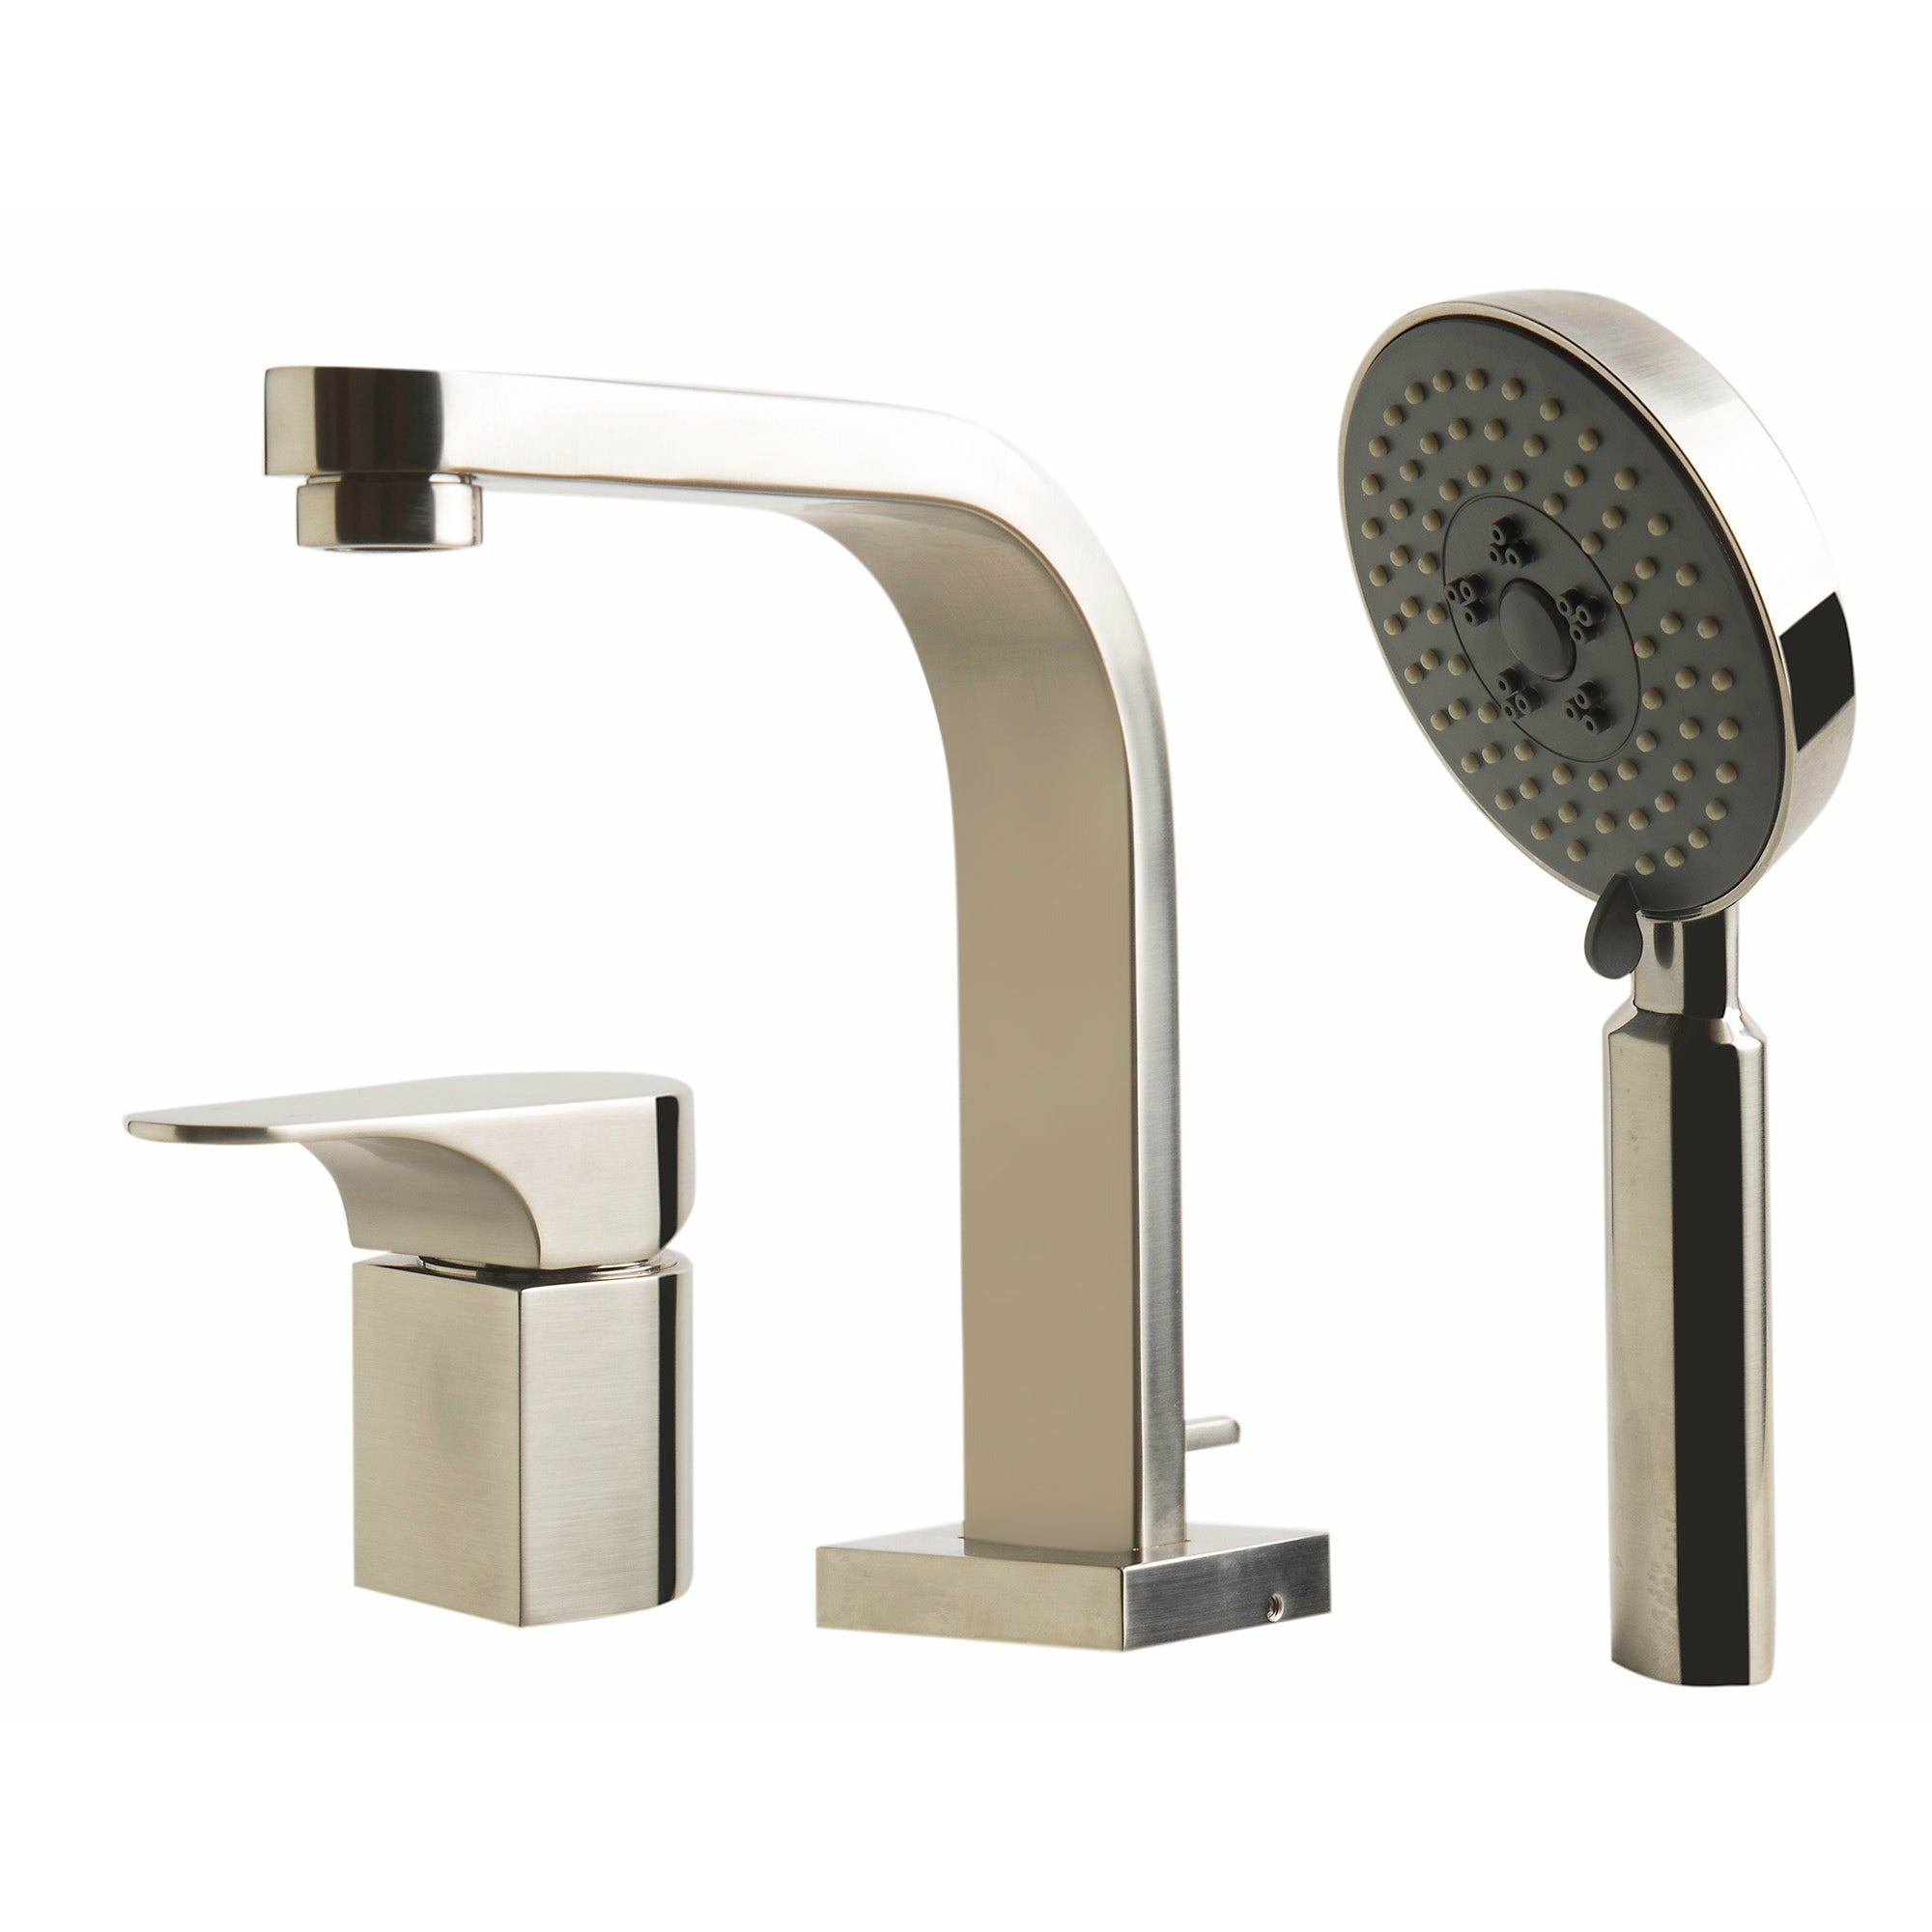 ALFI AB2703 Deck Mounted Tub Filler and Round Hand Held Shower Head solid brass construction brushed nickel in a white background